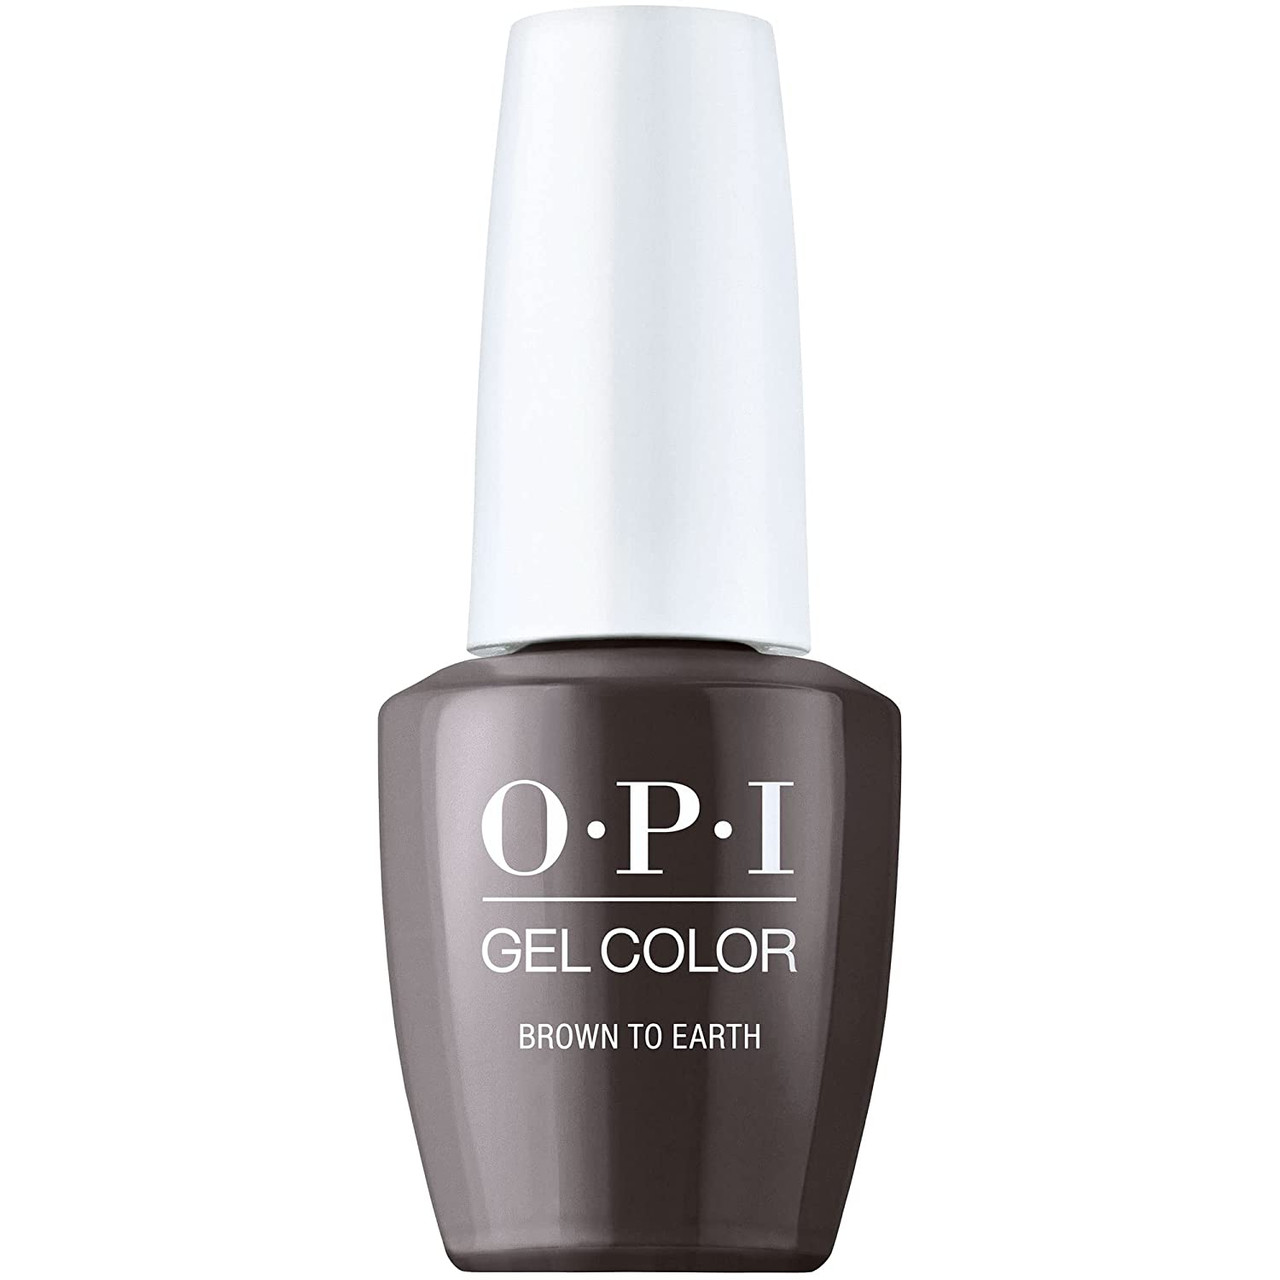 OPI GelColor Brown to earth - .5 Oz / 15 mL